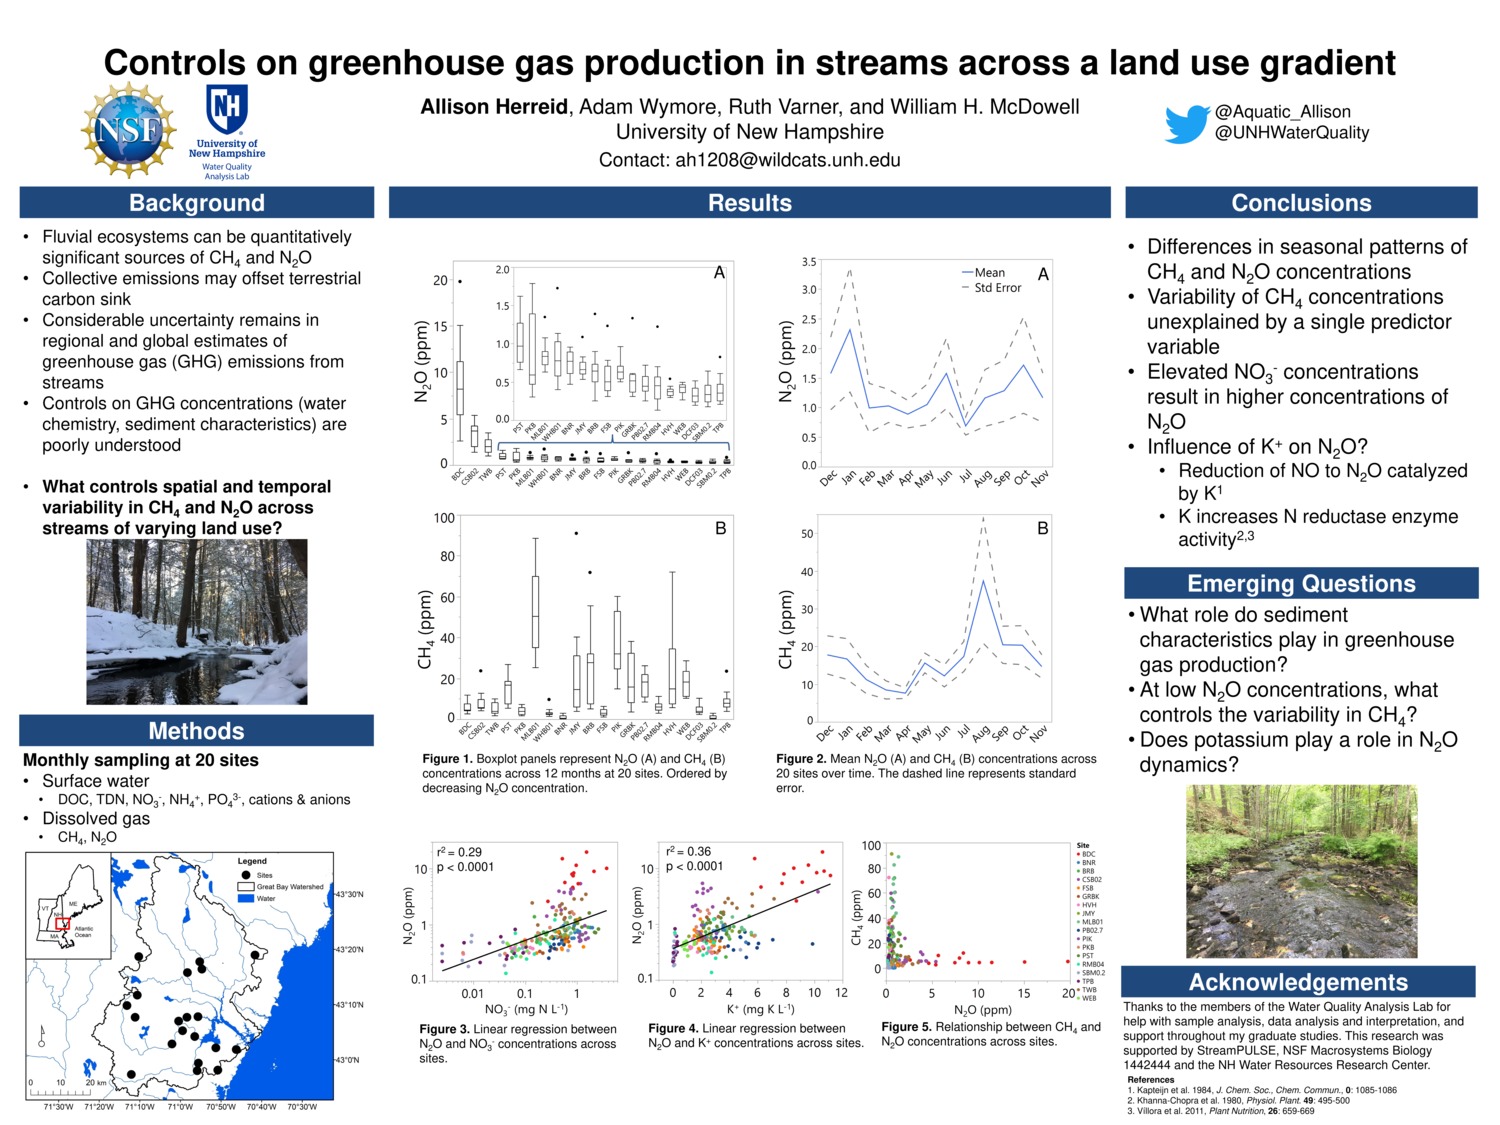 Controls On Greenhouse Gas Production In Streams Across A Land Use Gradient by ah1208